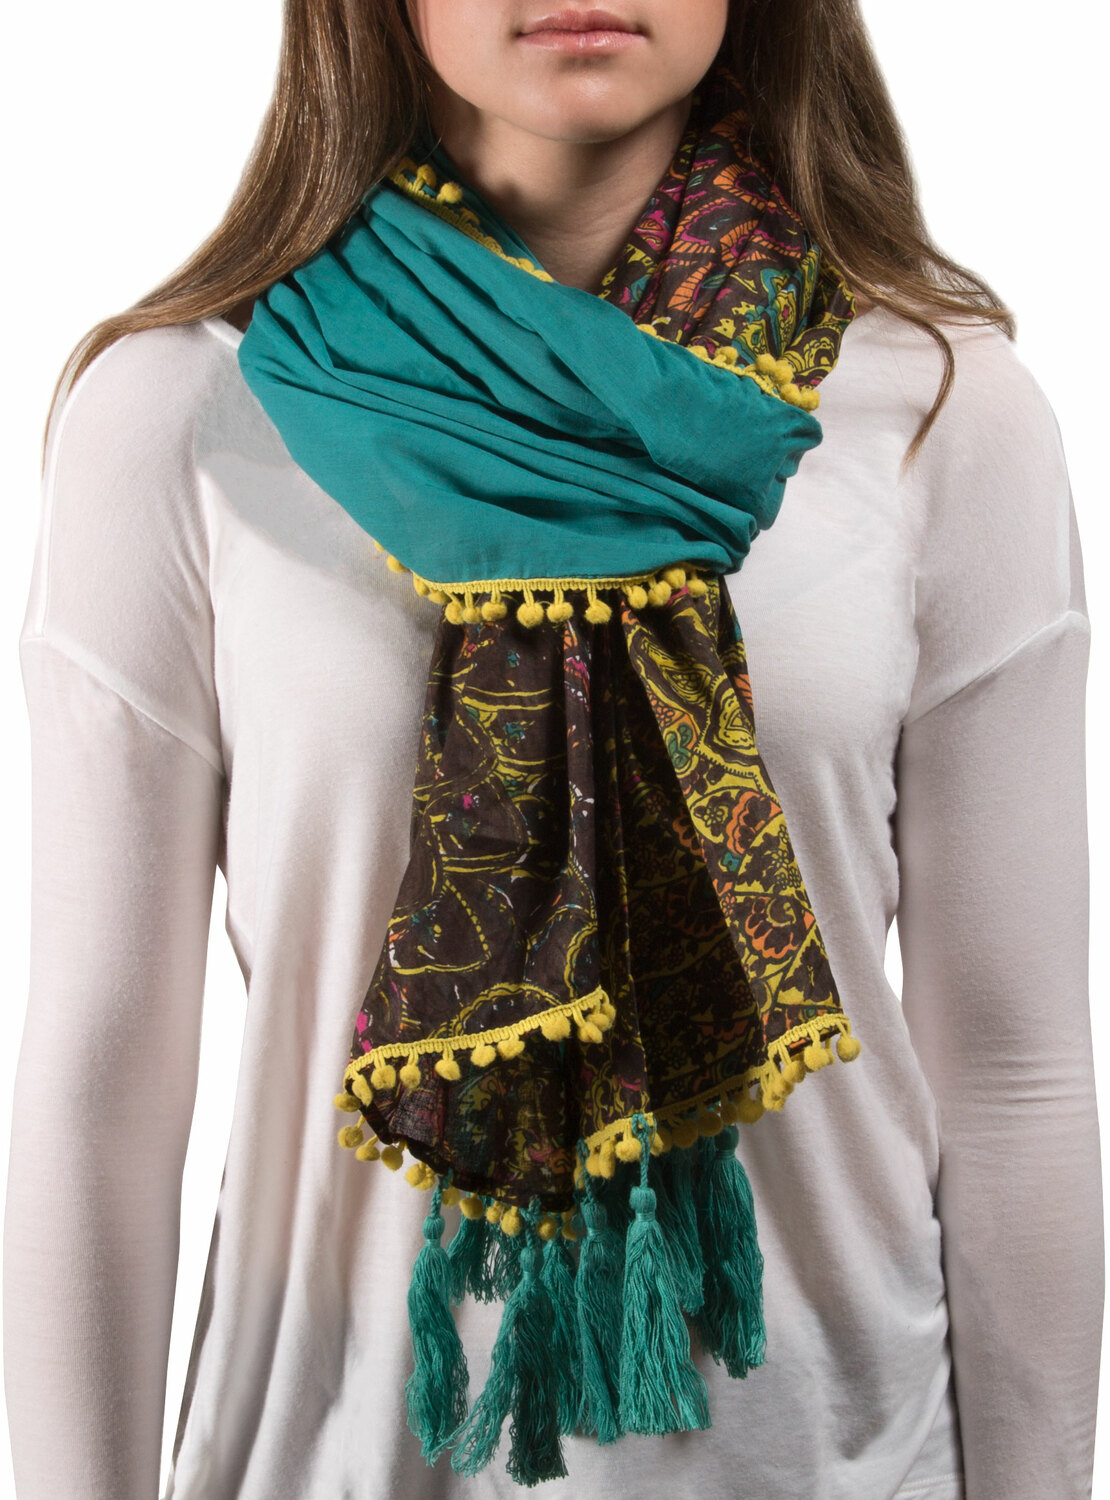 Peacock Cotton Scarf by H2Z - Destination Bags and Scarves - Peacock Cotton Scarf - 20" x 71" Multicolor Floral Scarf